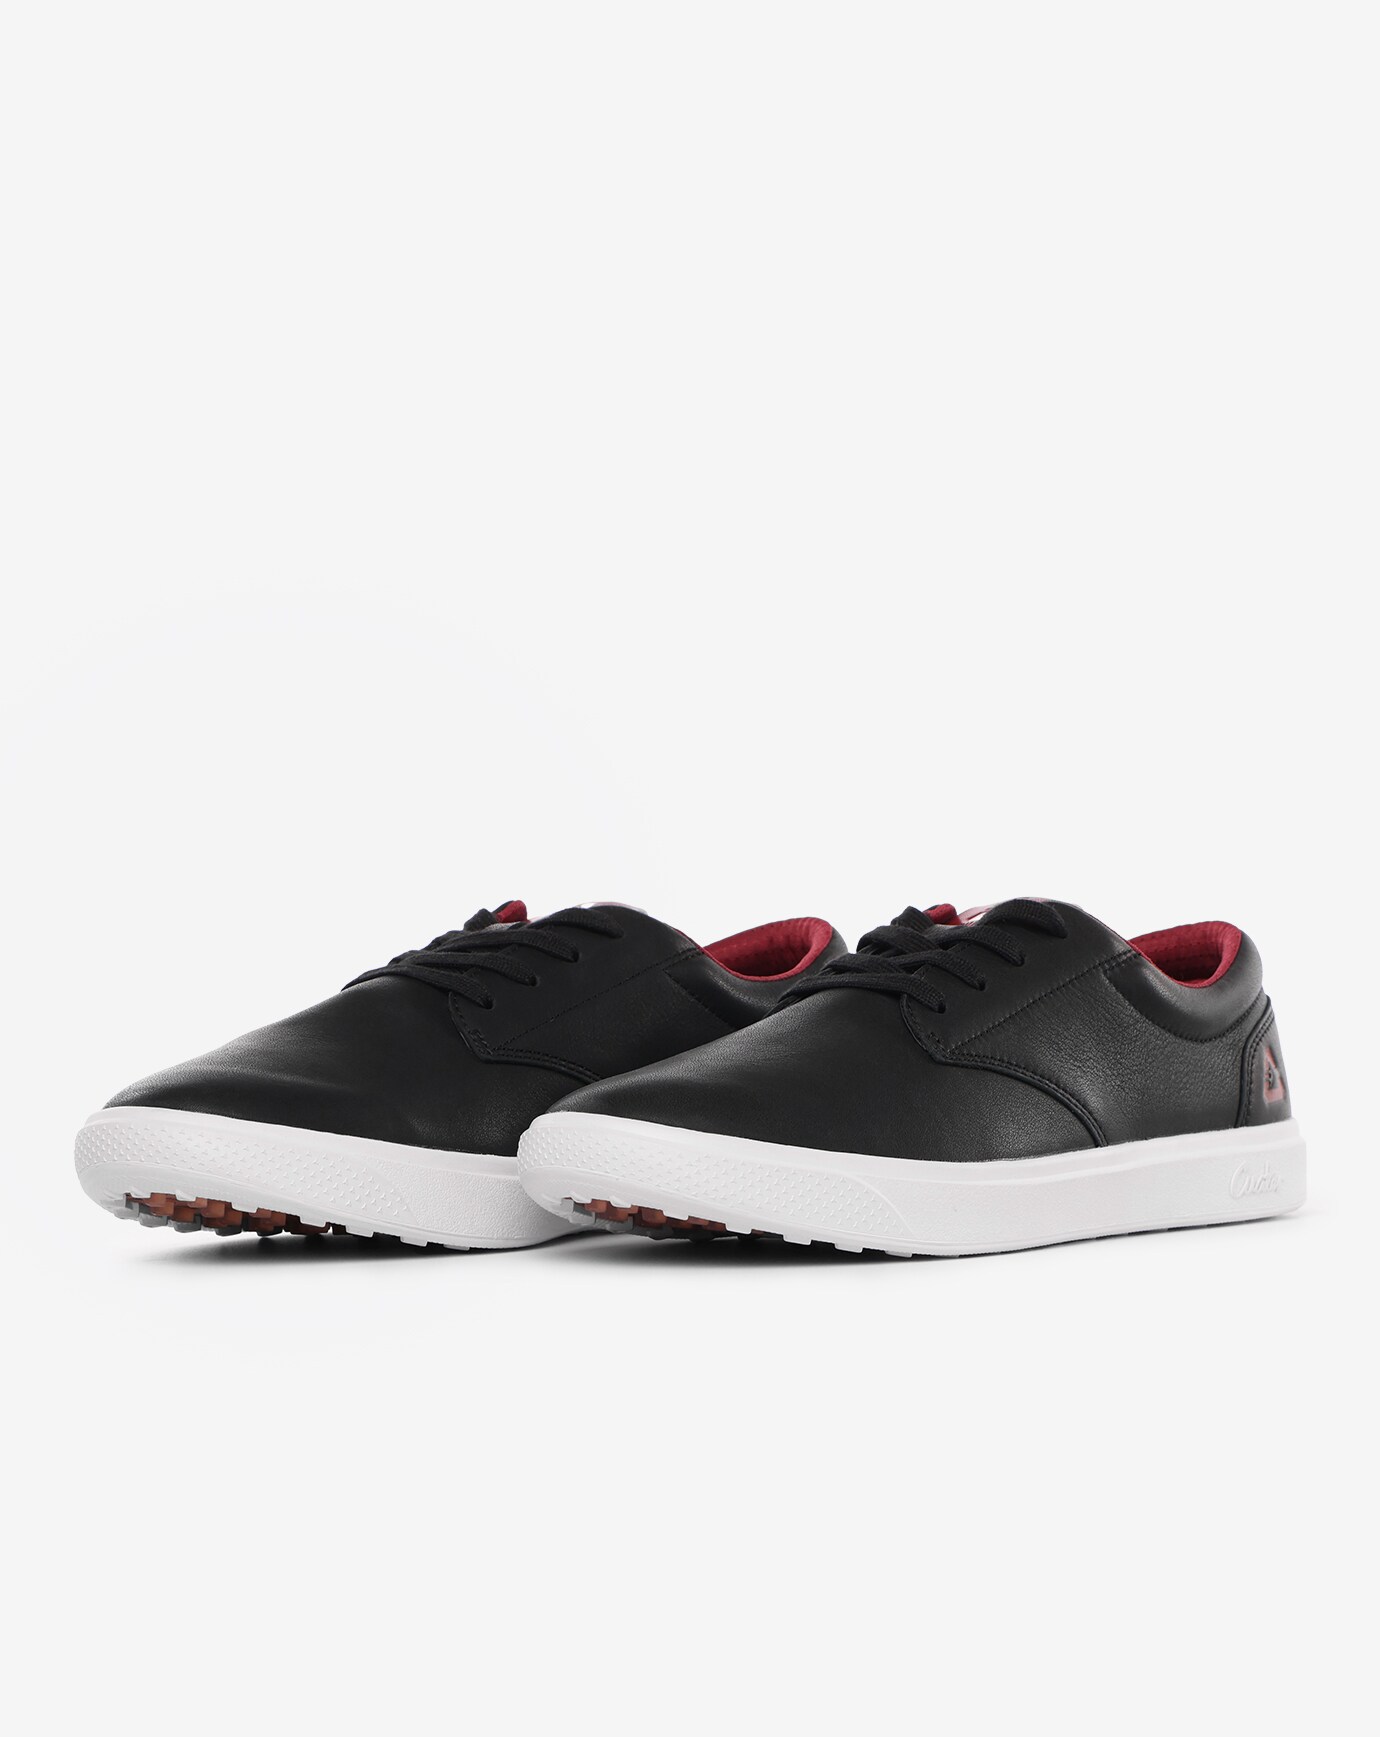 THE WILDCARD LEATHER SPIKELESS GOLF SHOE Image 5